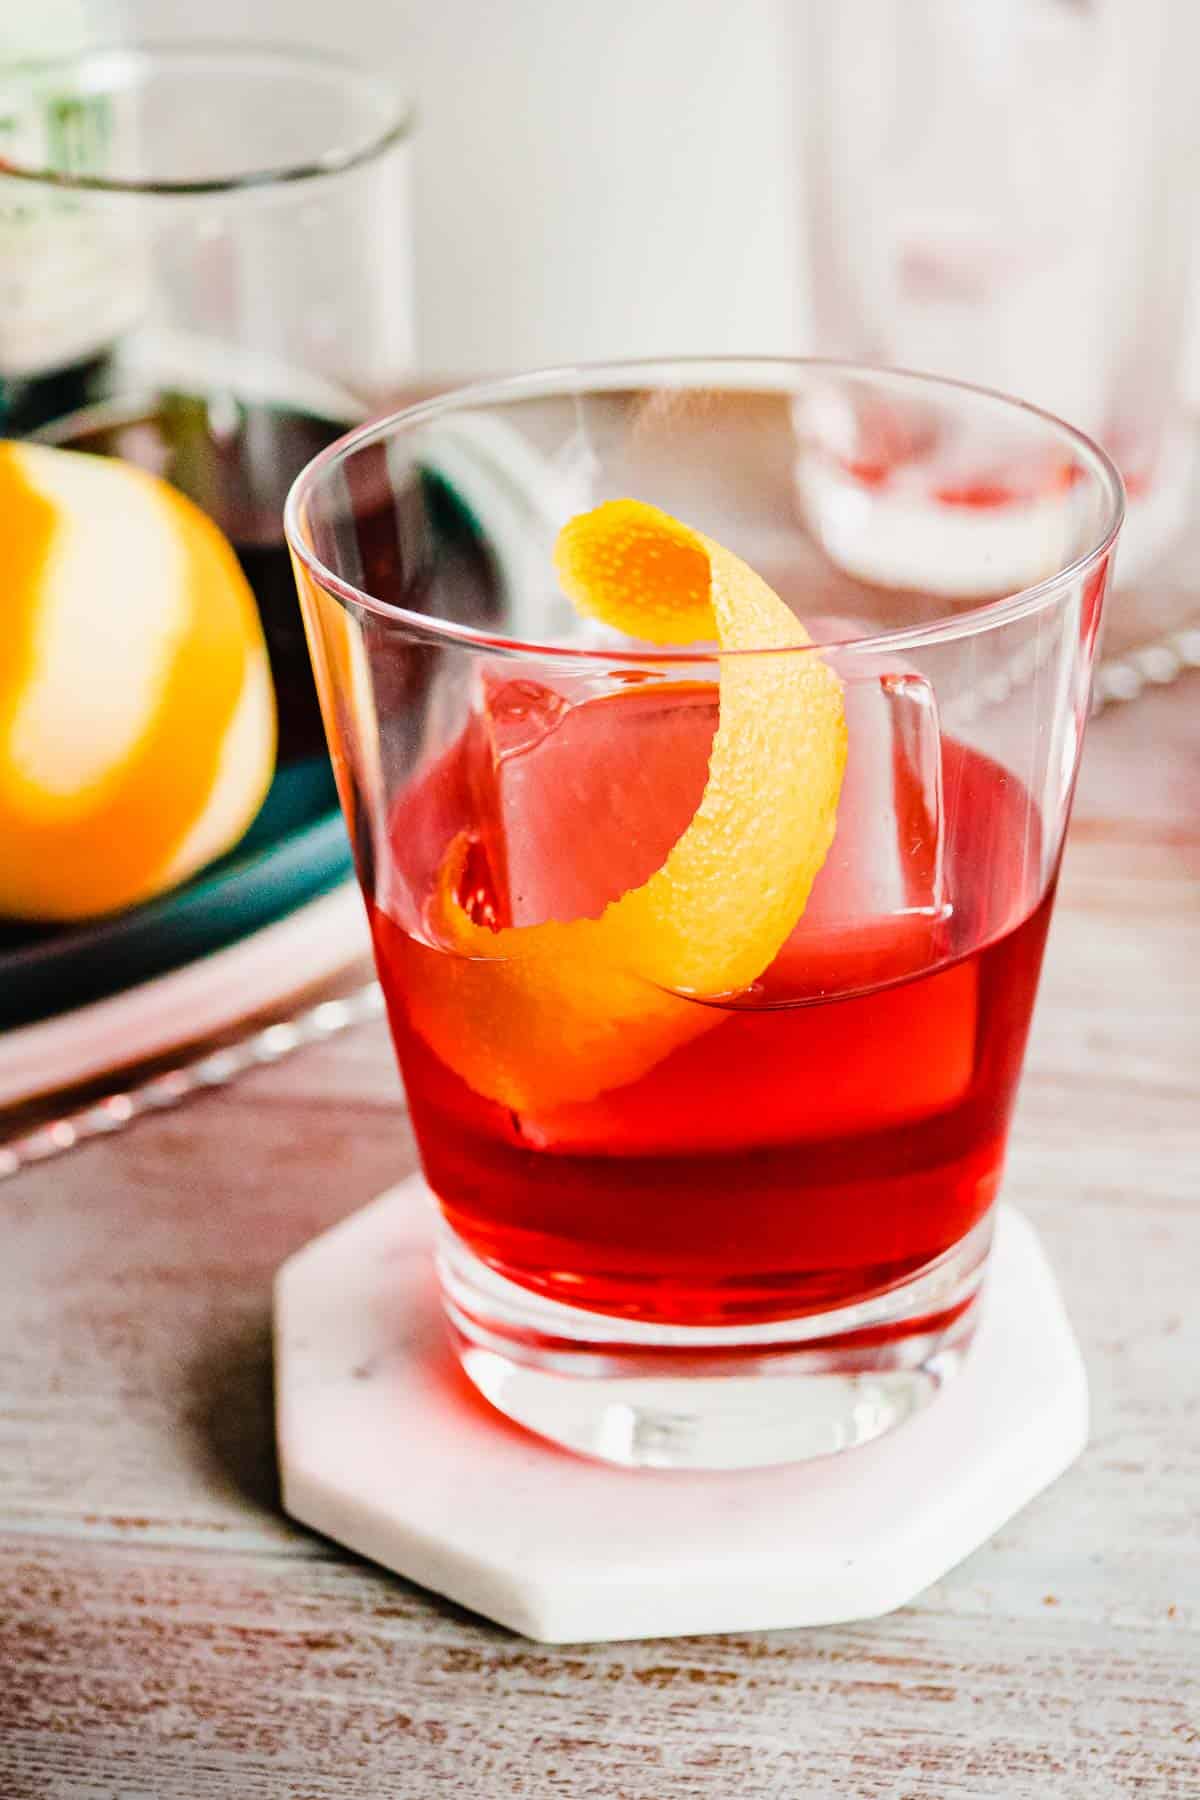 A negroni cocktail with one large ice cube and an orange twist.